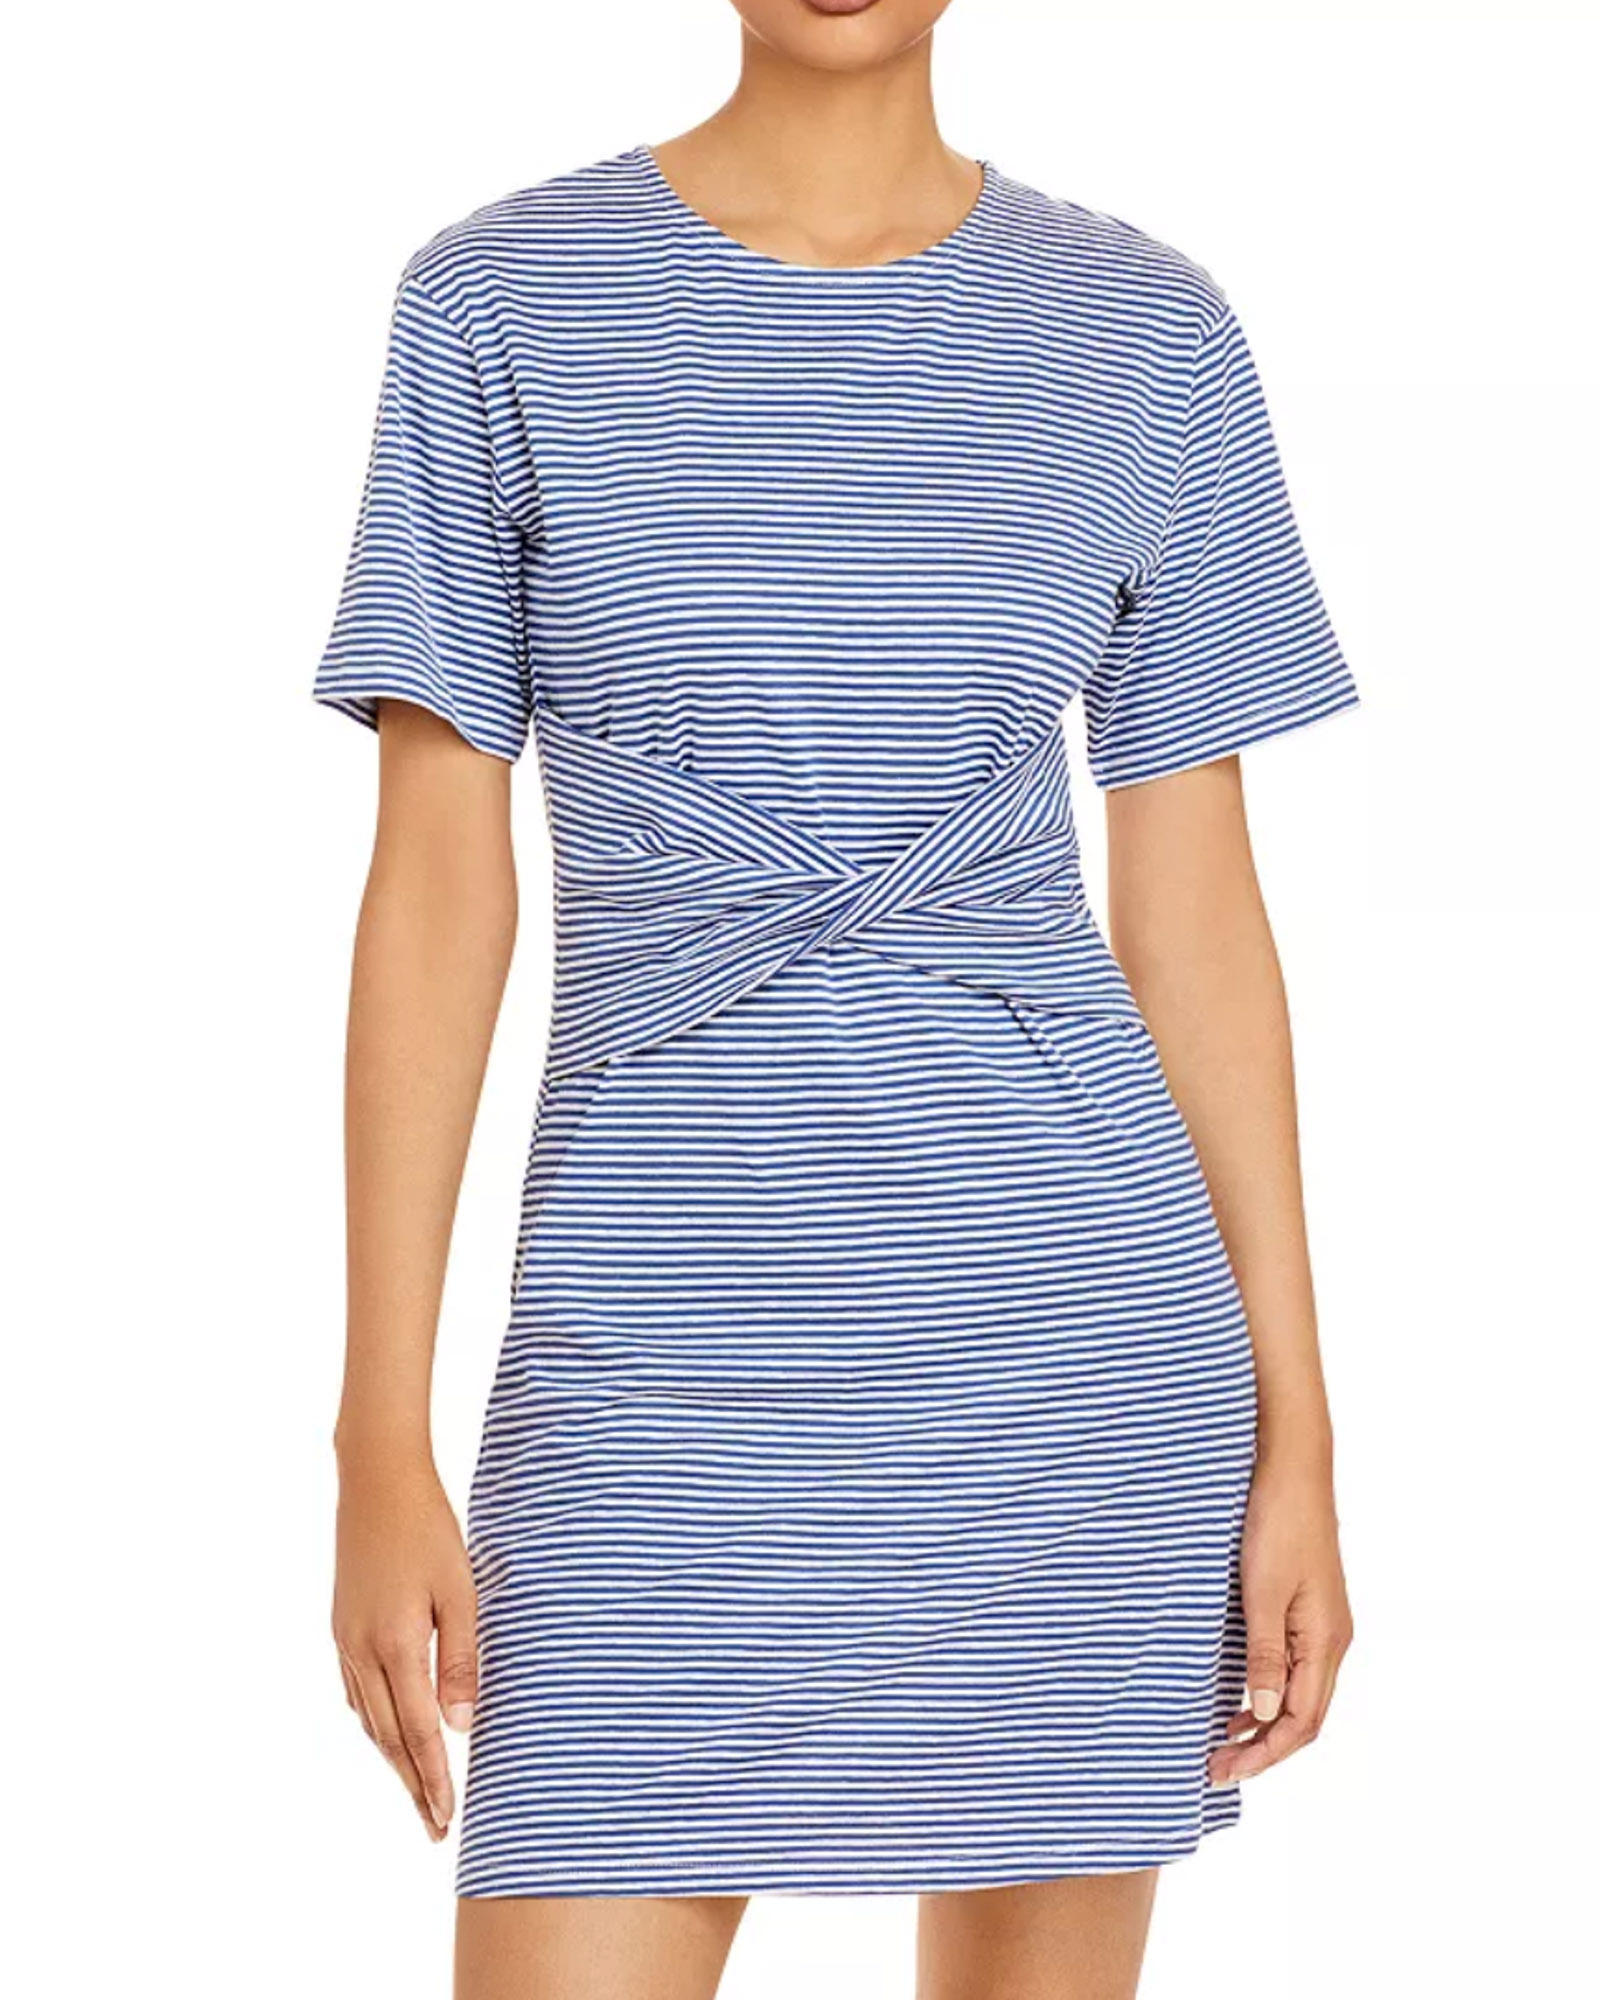 Theory Front Twist Striped Dress in Blue